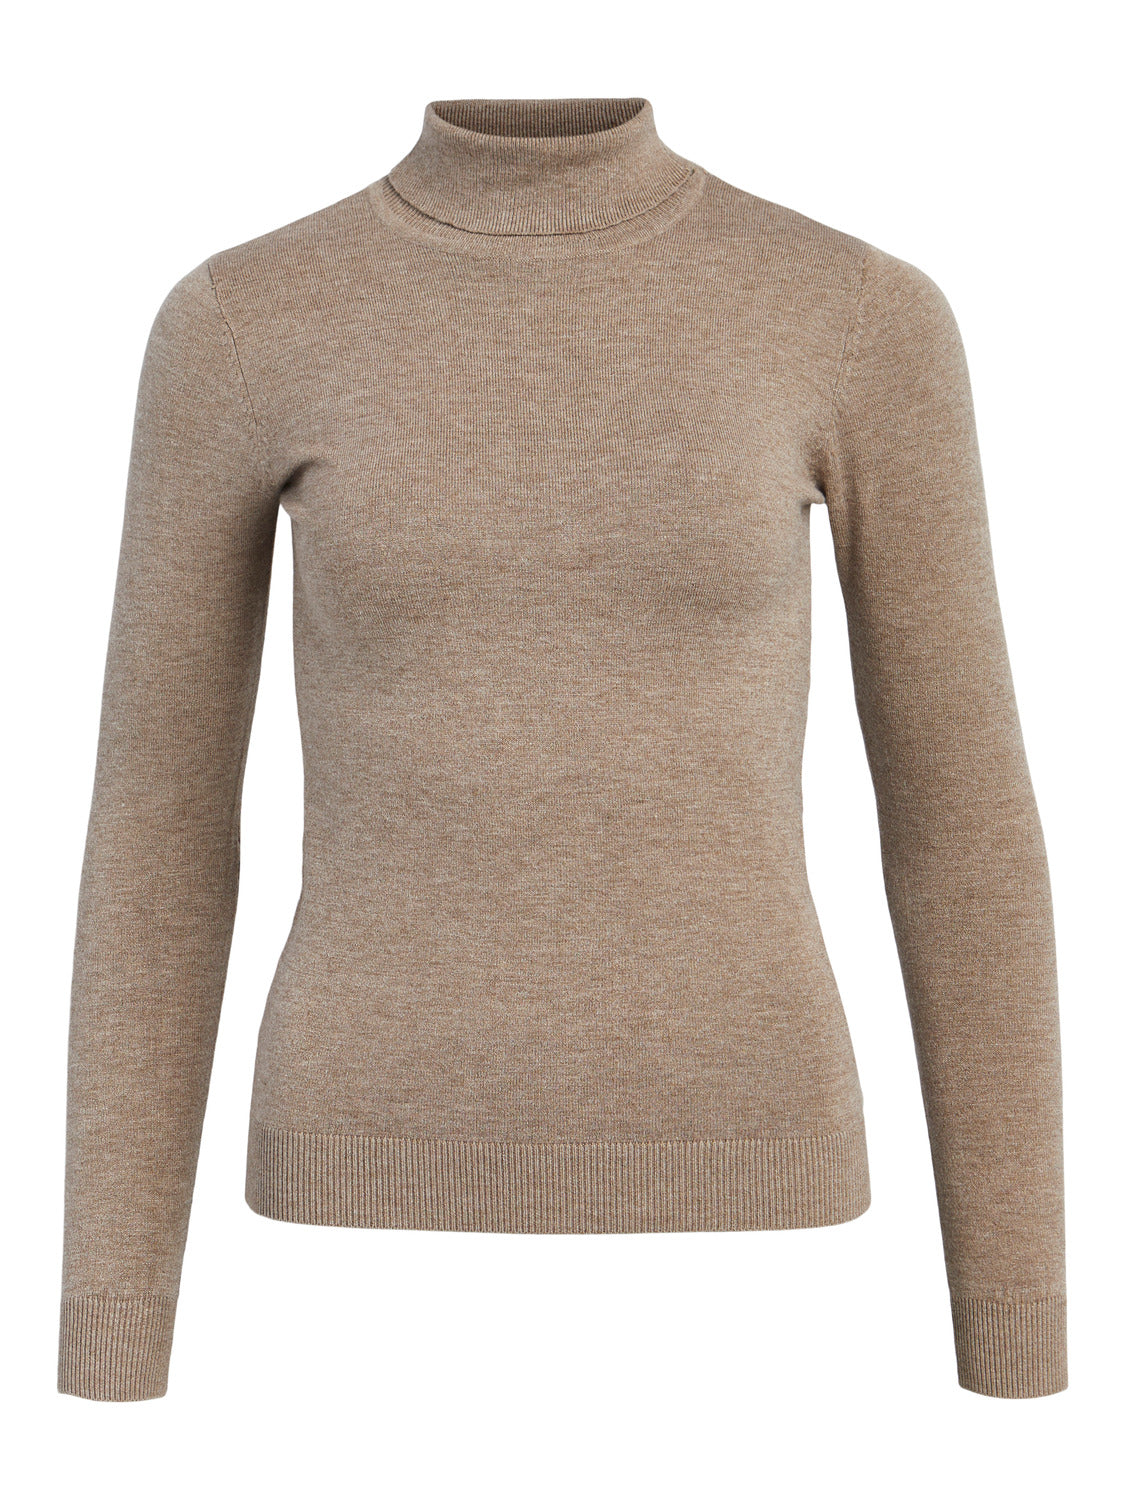 OBJTHESS Pullover - Fossil